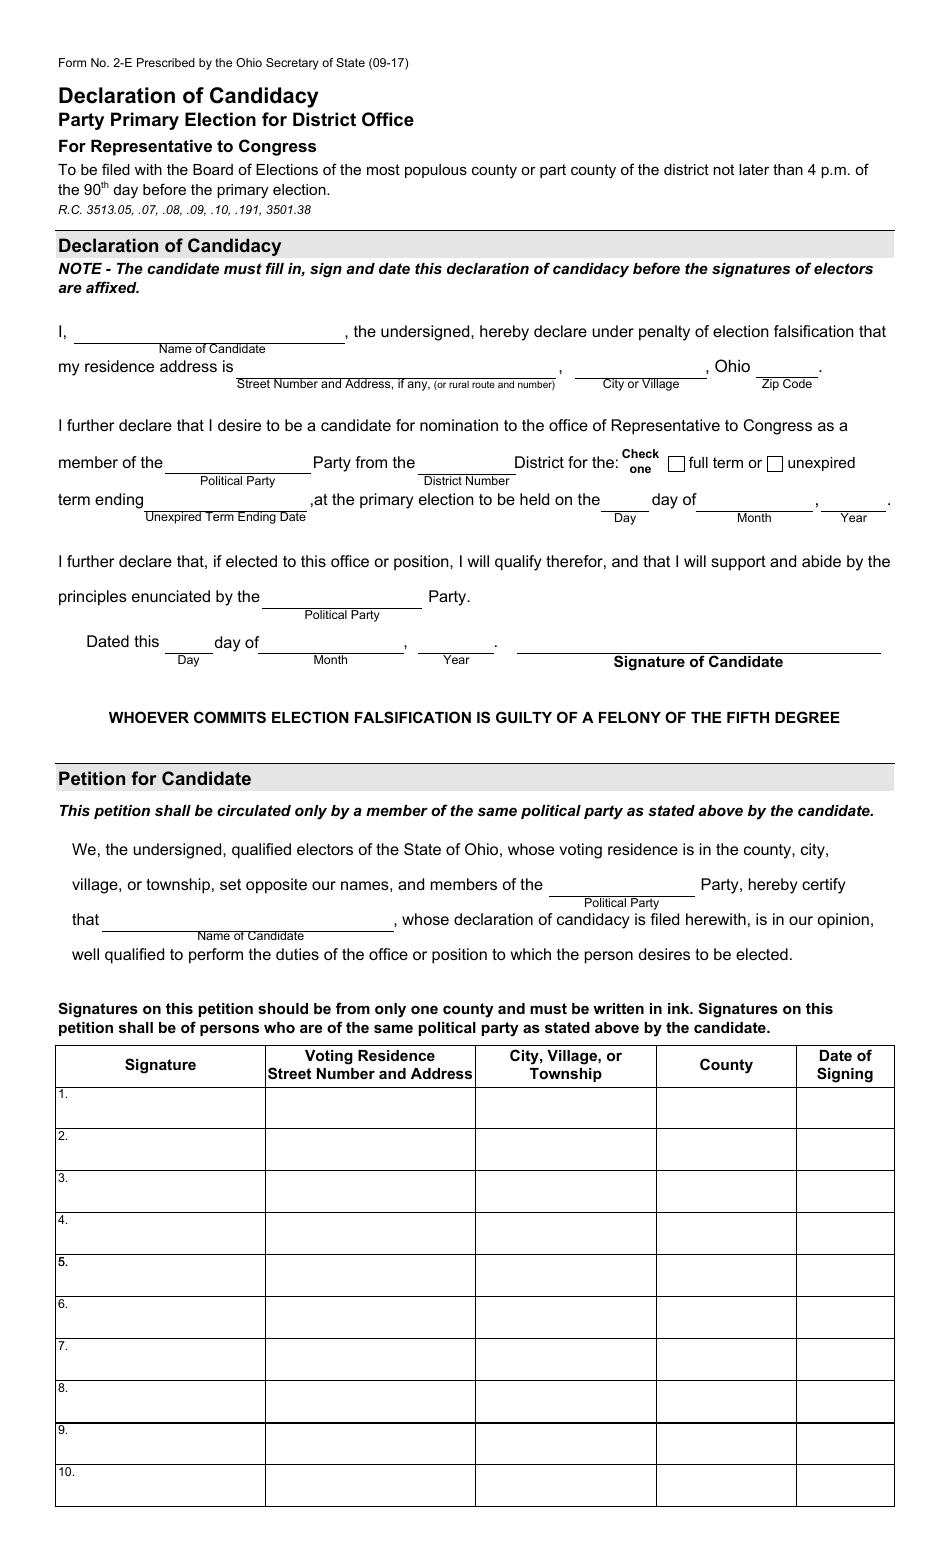 Form 2E Declaration of Candidacy - Party Primary District Office - Representative to Congress - Ohio, Page 1